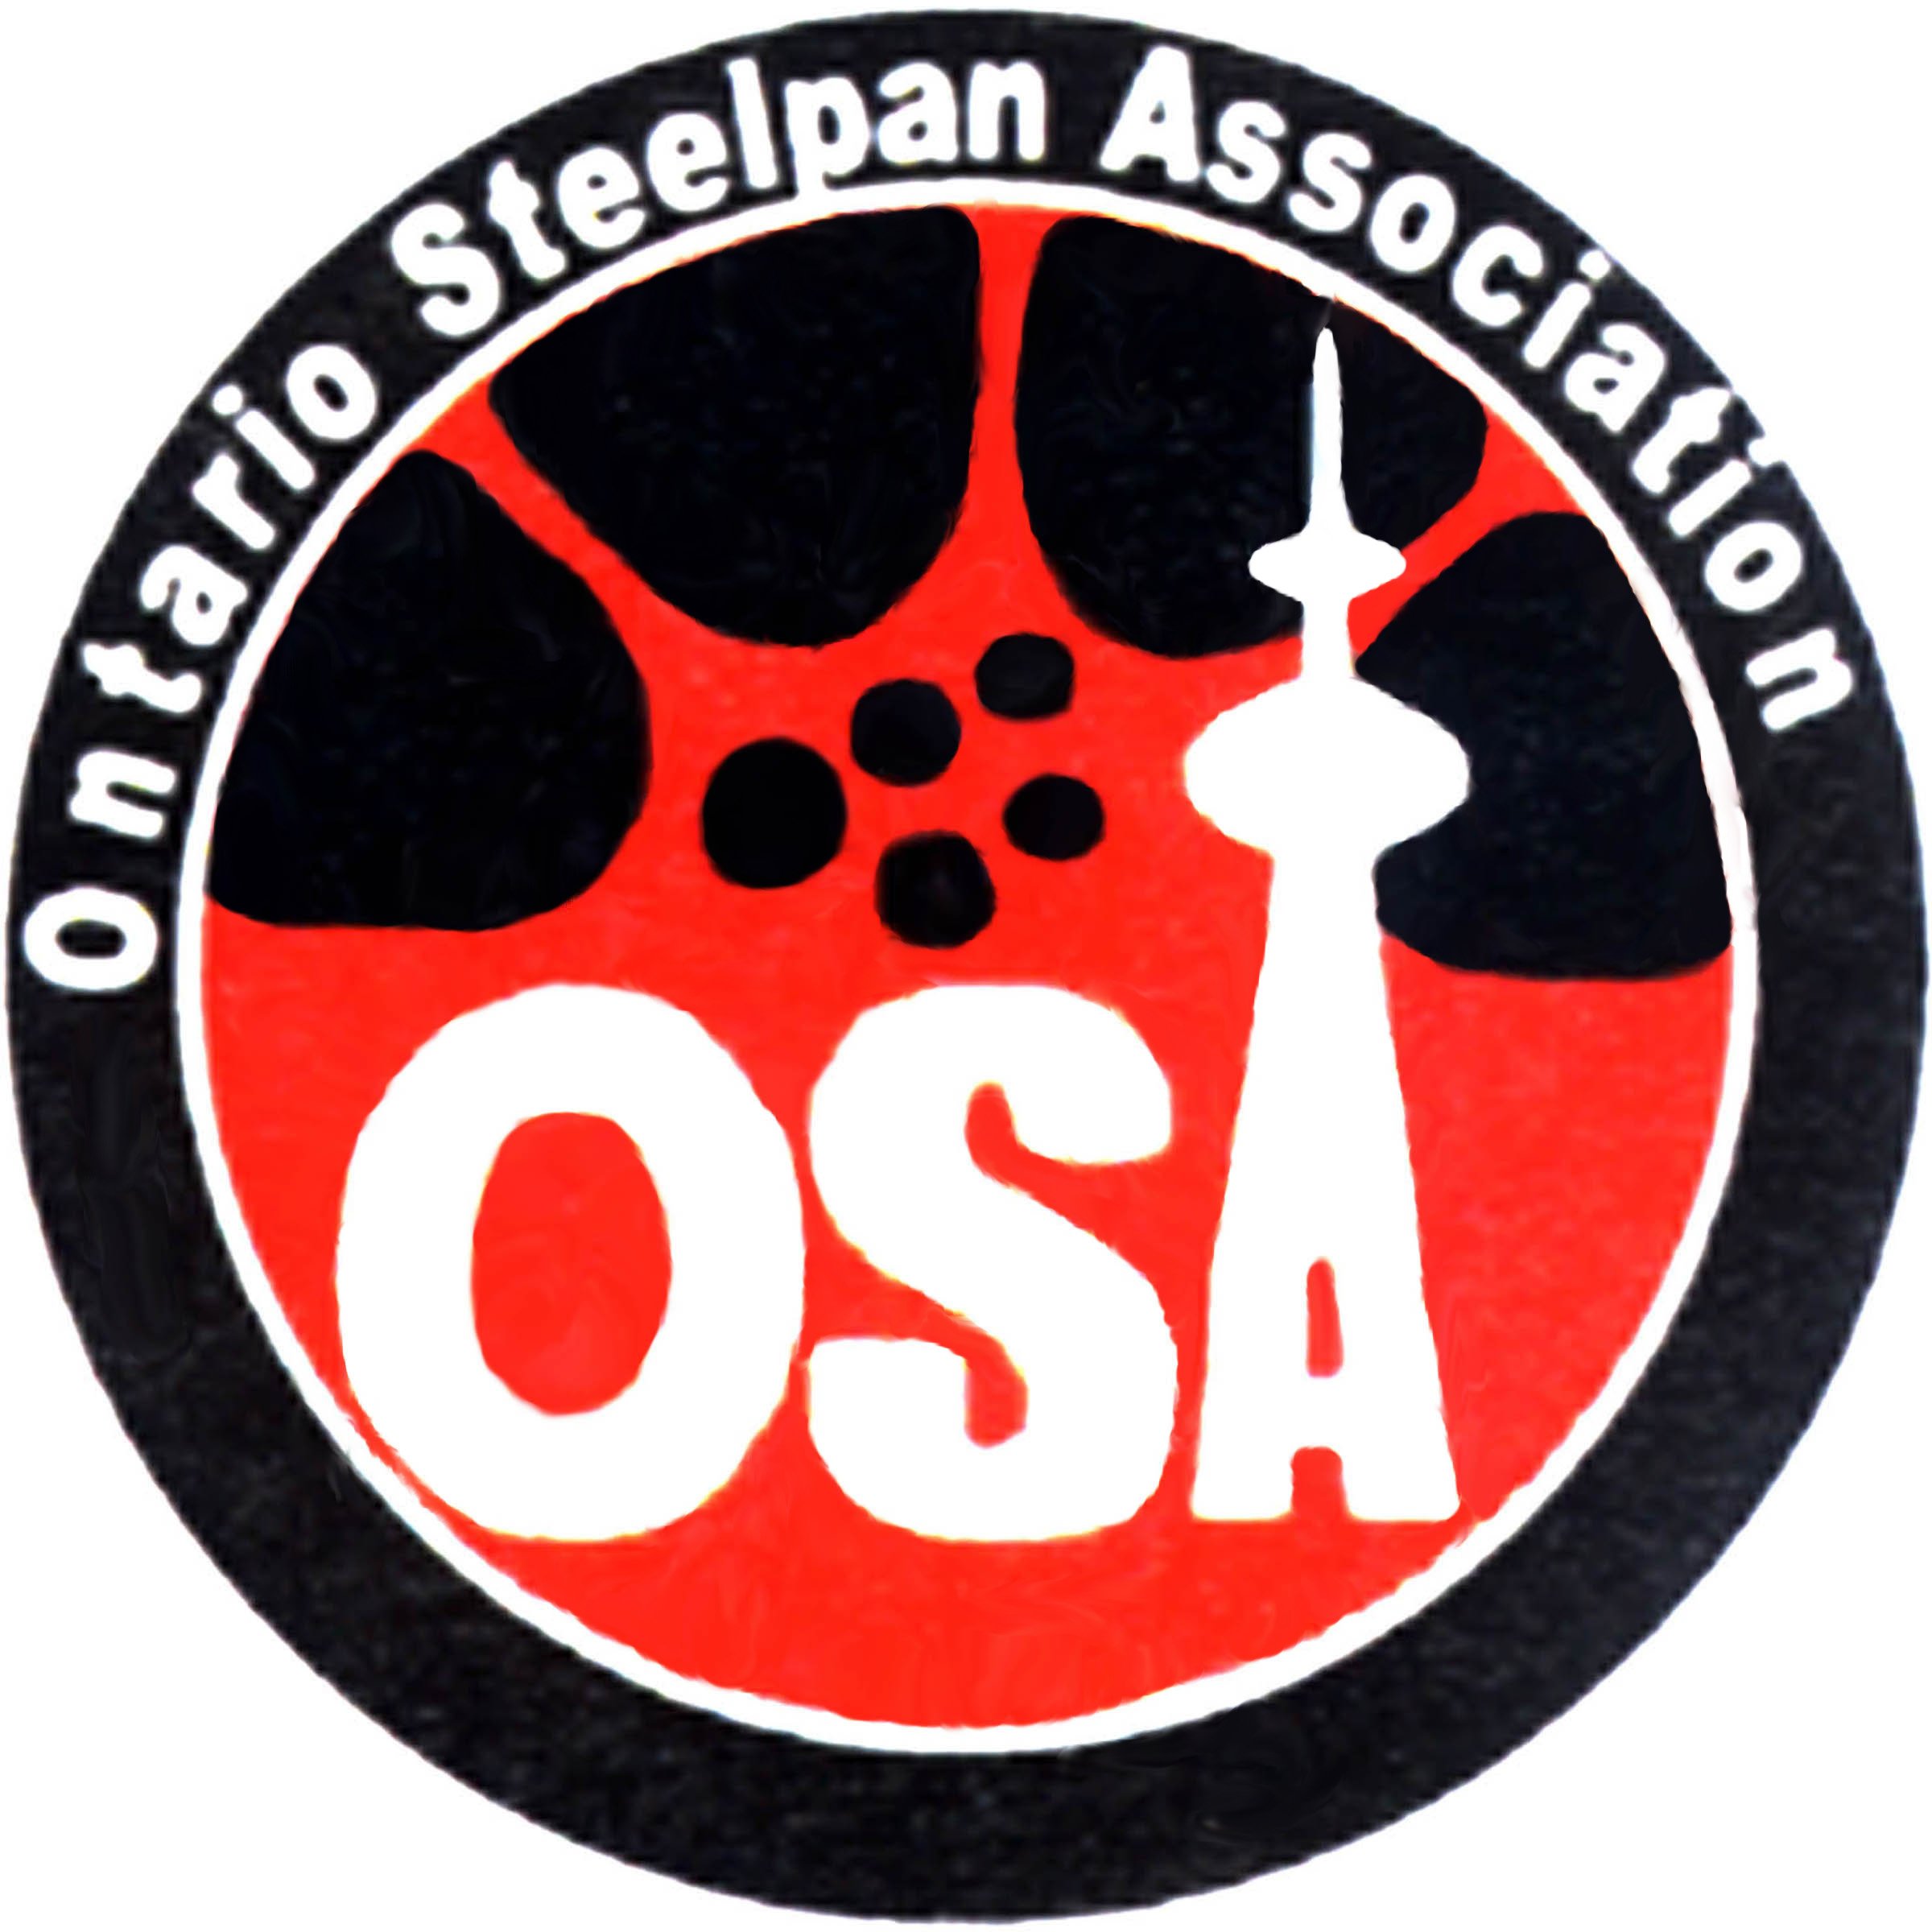 OSA is the culmination of an initiative by avid steelpan enthusiasts to promote and preserve their musical art-form in Canada through an umbrella organization.